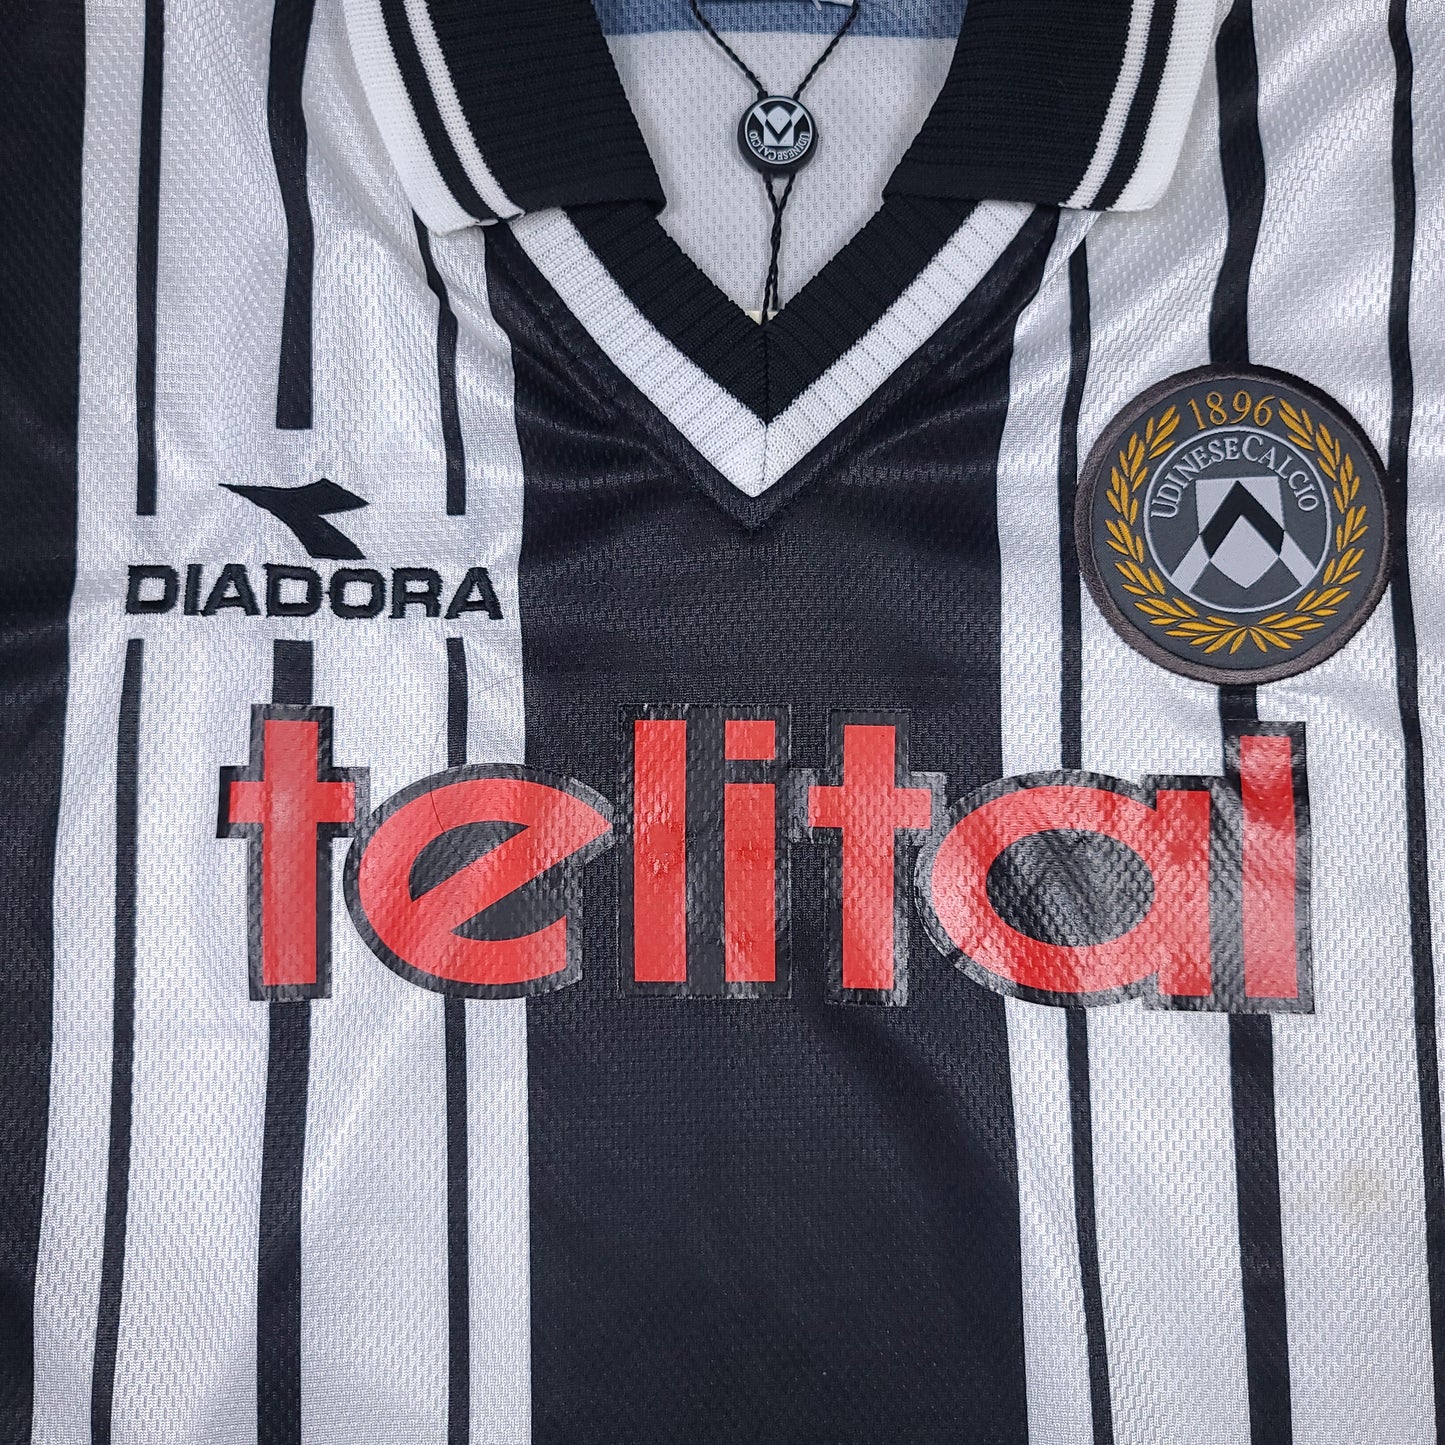 Vintage Udinese Calcio Diadora 1998-99 Home Soccer Jersey (New with Tags)